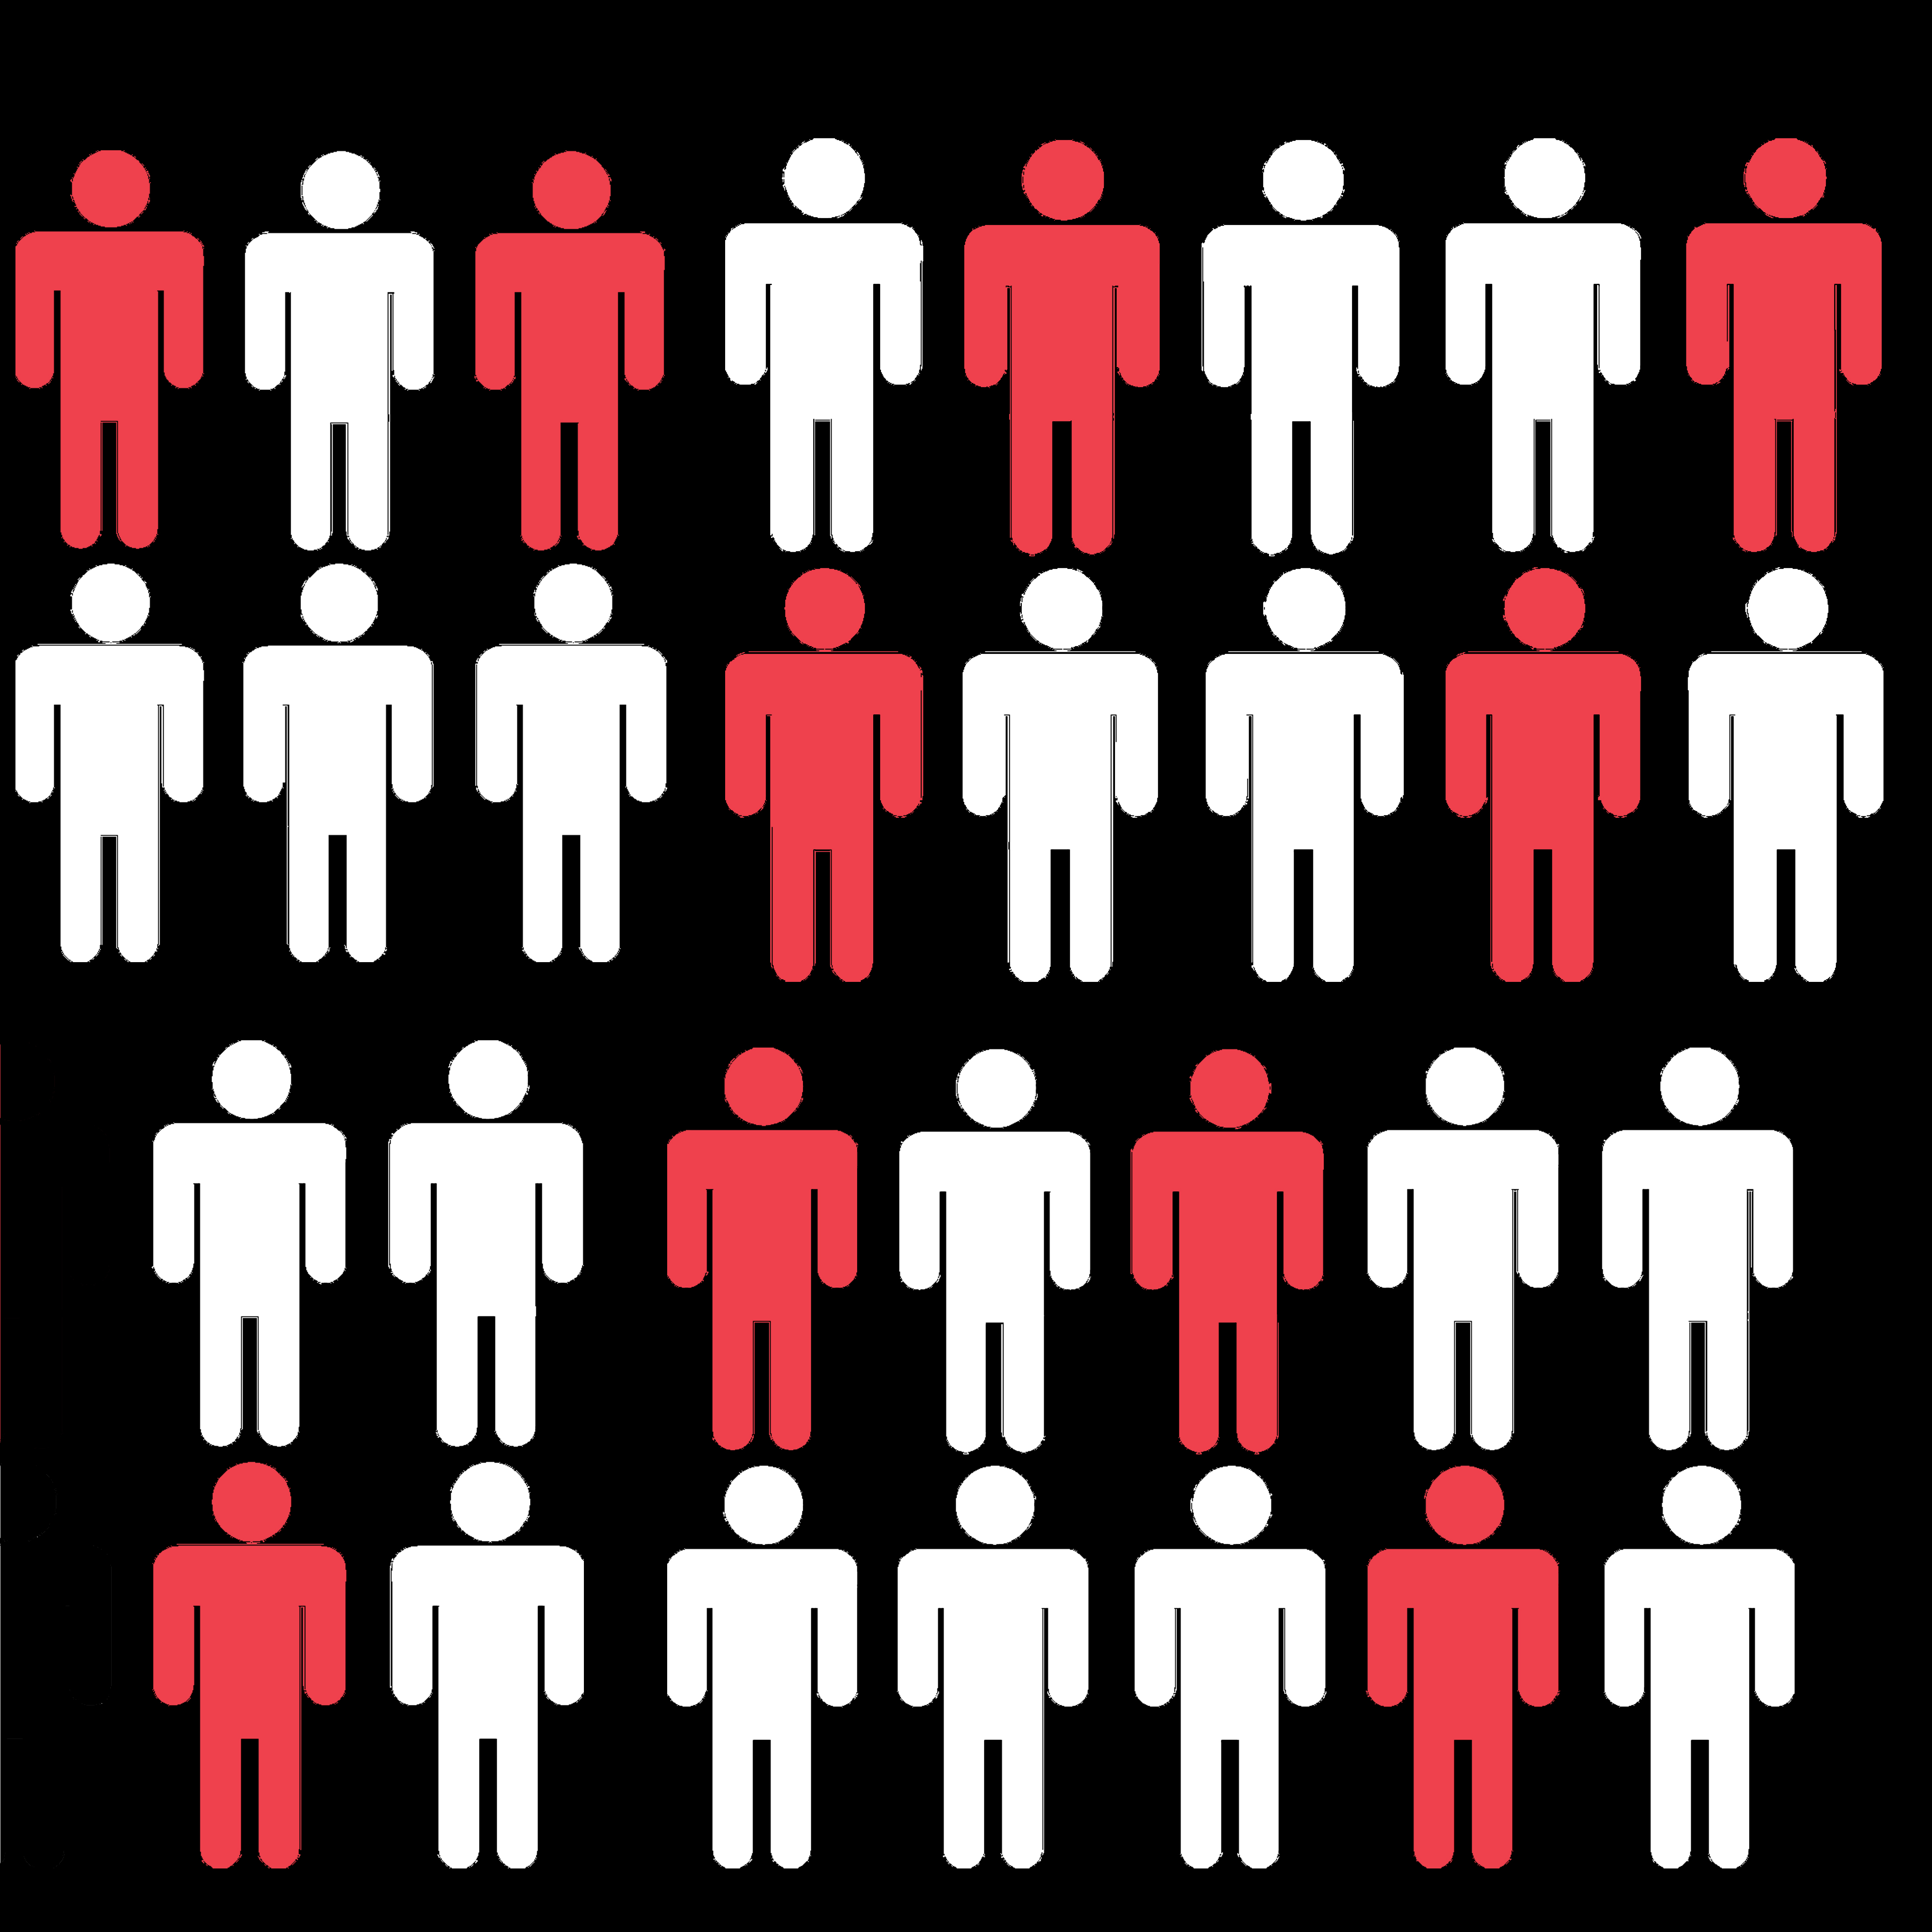 Graphic shows 30 stick figures. 10 are red, 20 are white in front of a black background. 